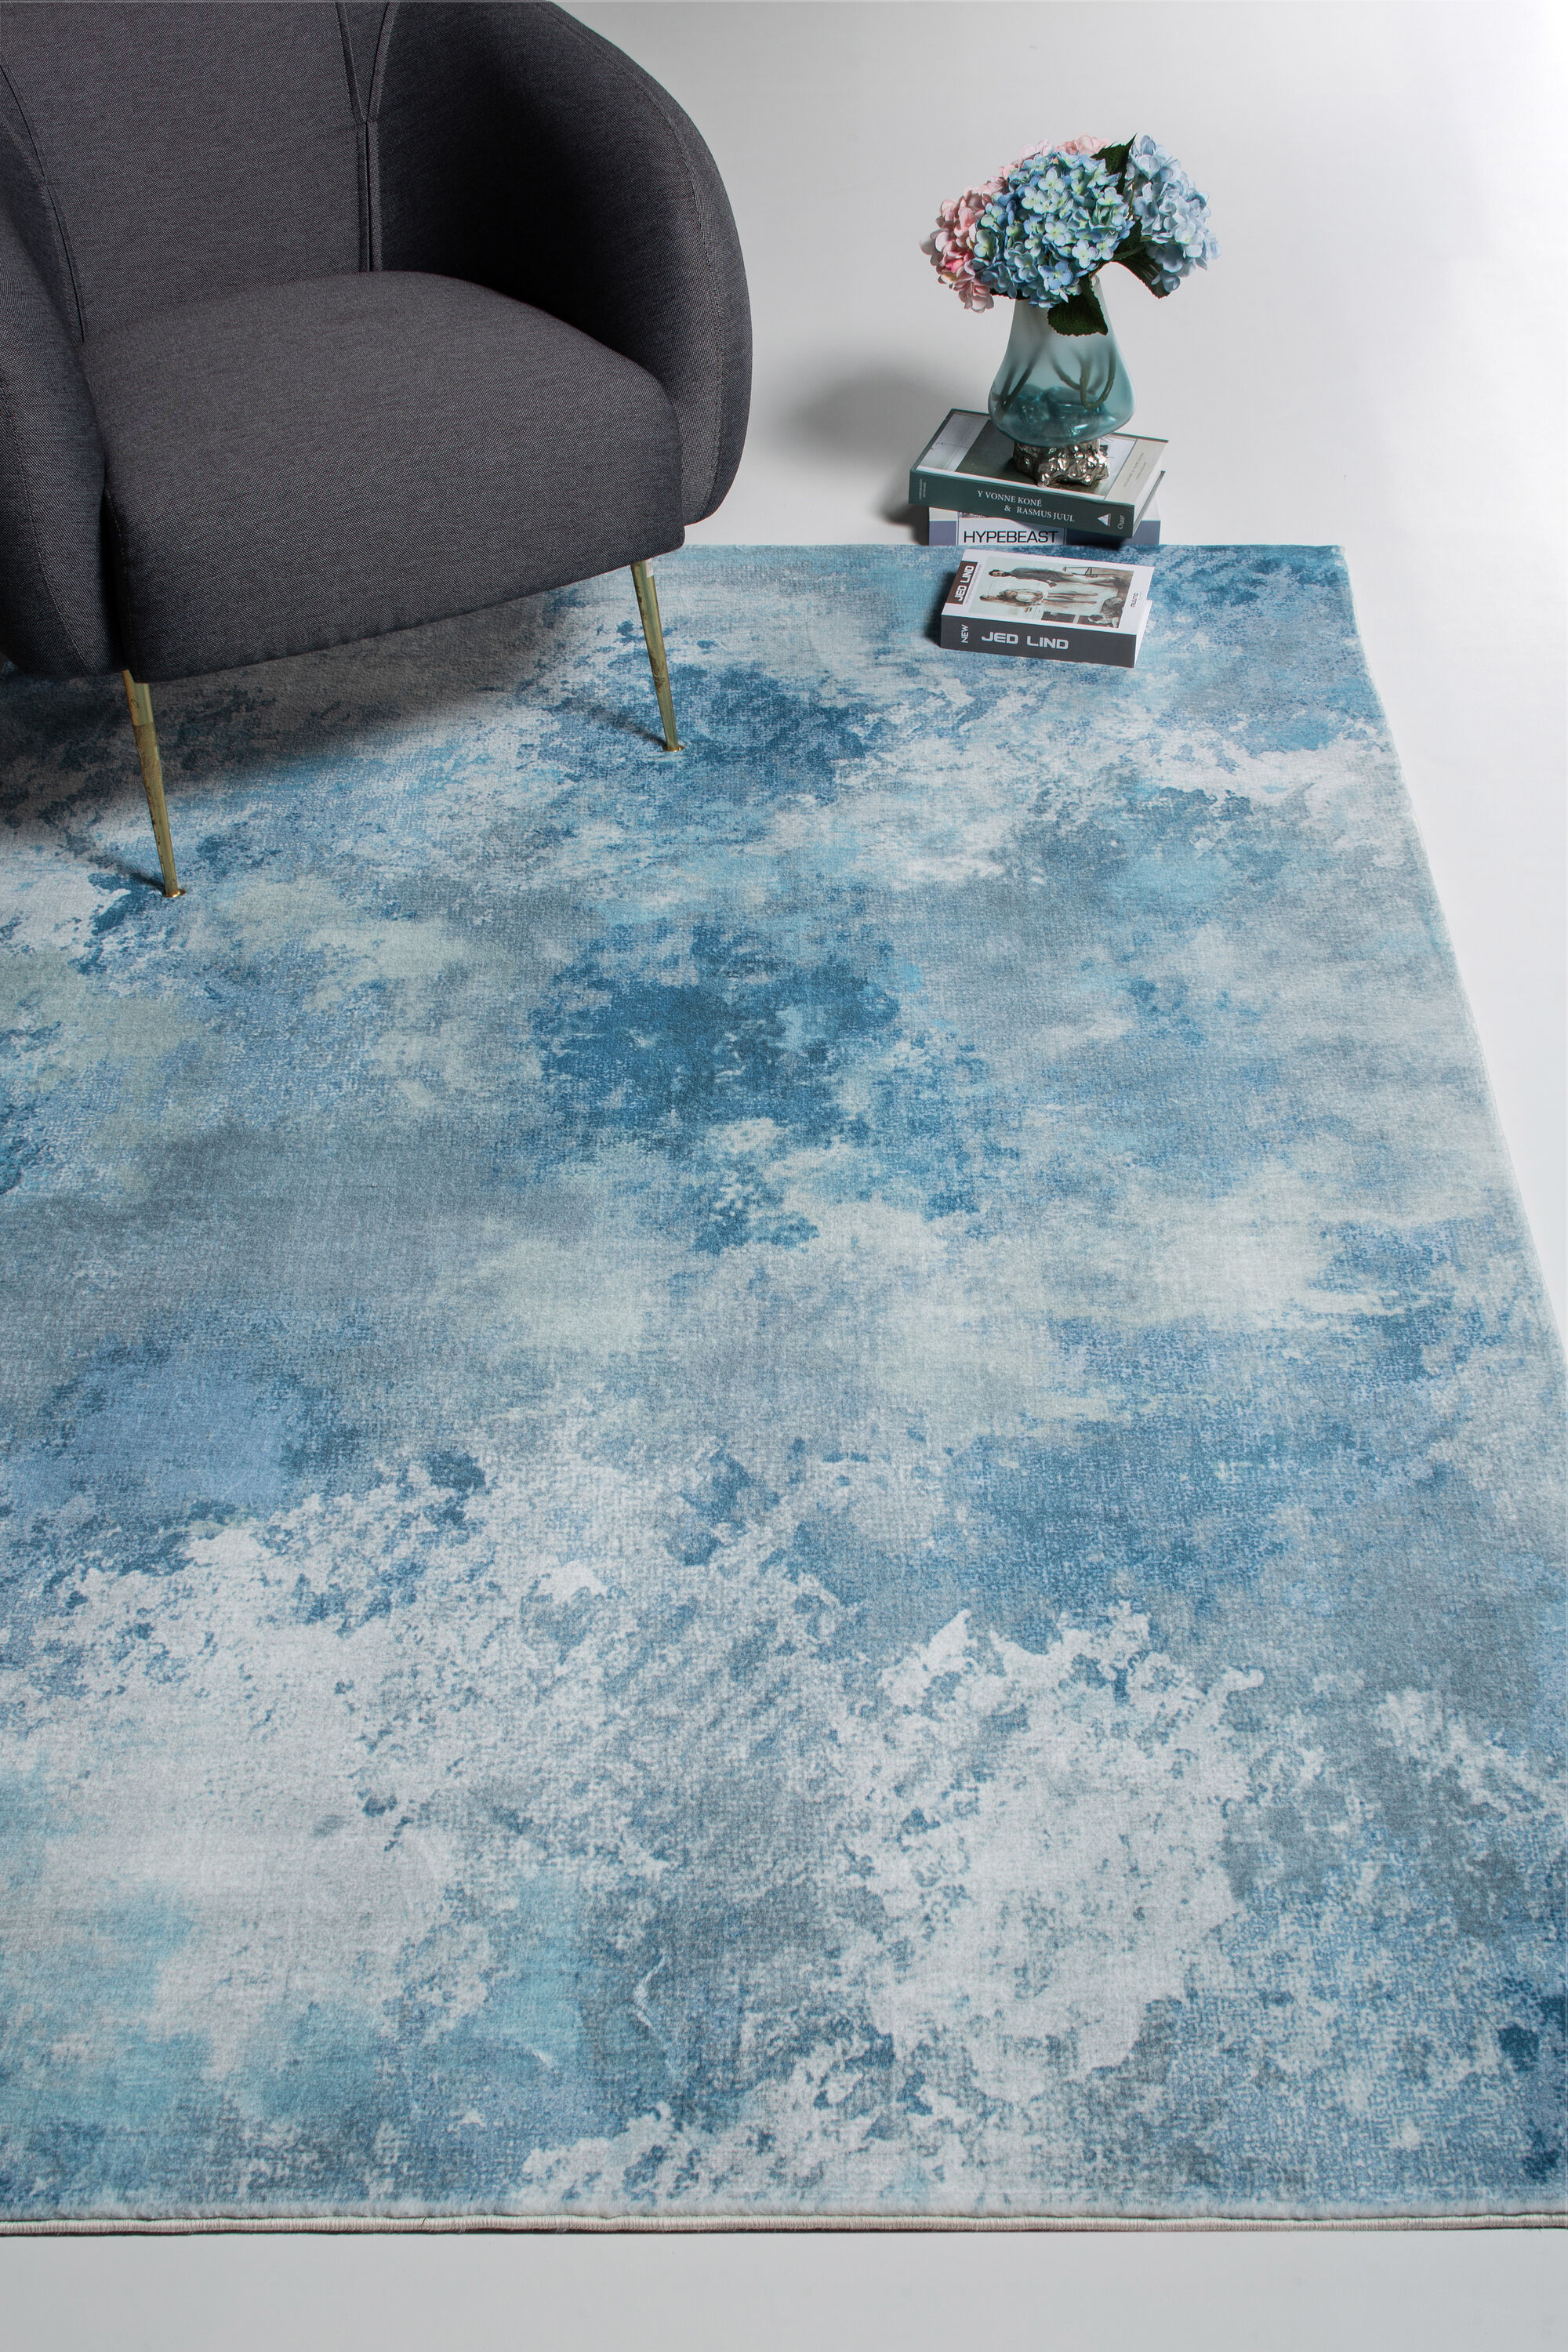 Everday Woven 2 X 7 Blue Indoor Abstract Coastal Runner Rug in the 